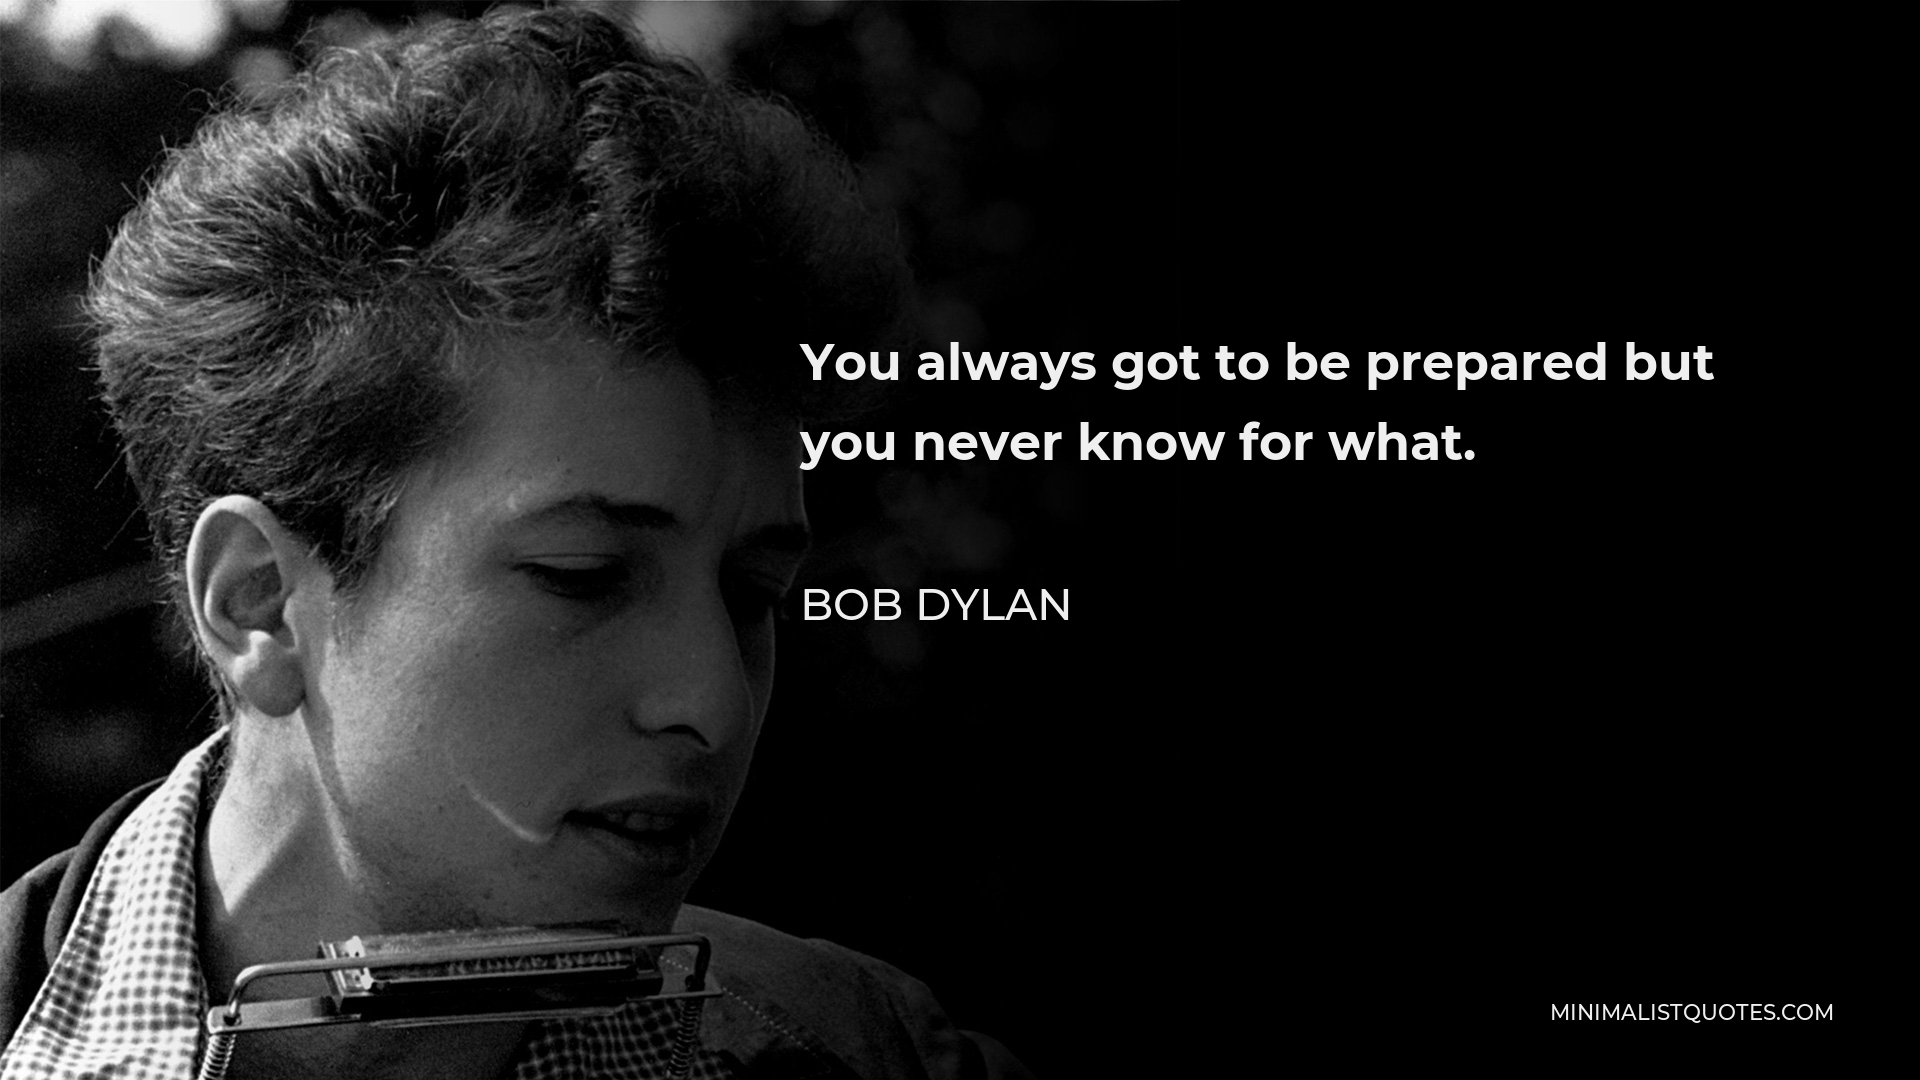 Bob Dylan Quote - You always got to be prepared but you never know for what.